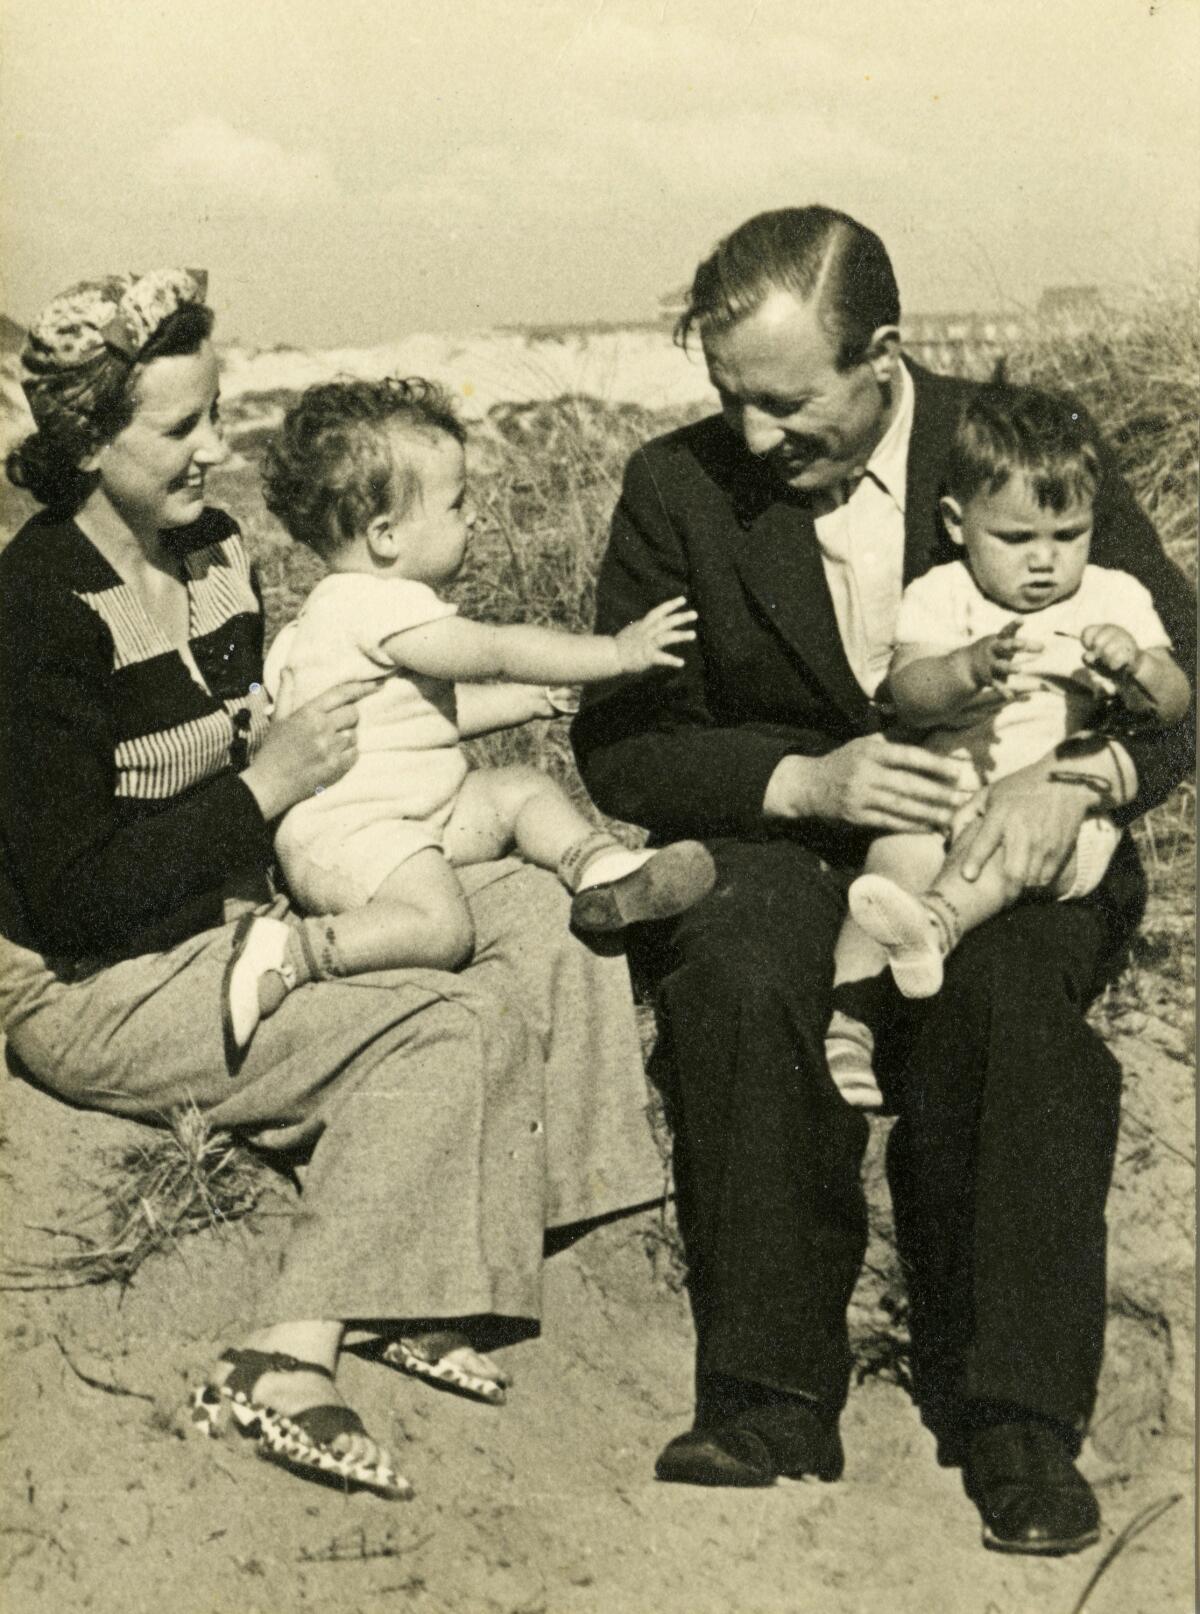 A black-and-white photo of a couple and their two small children.